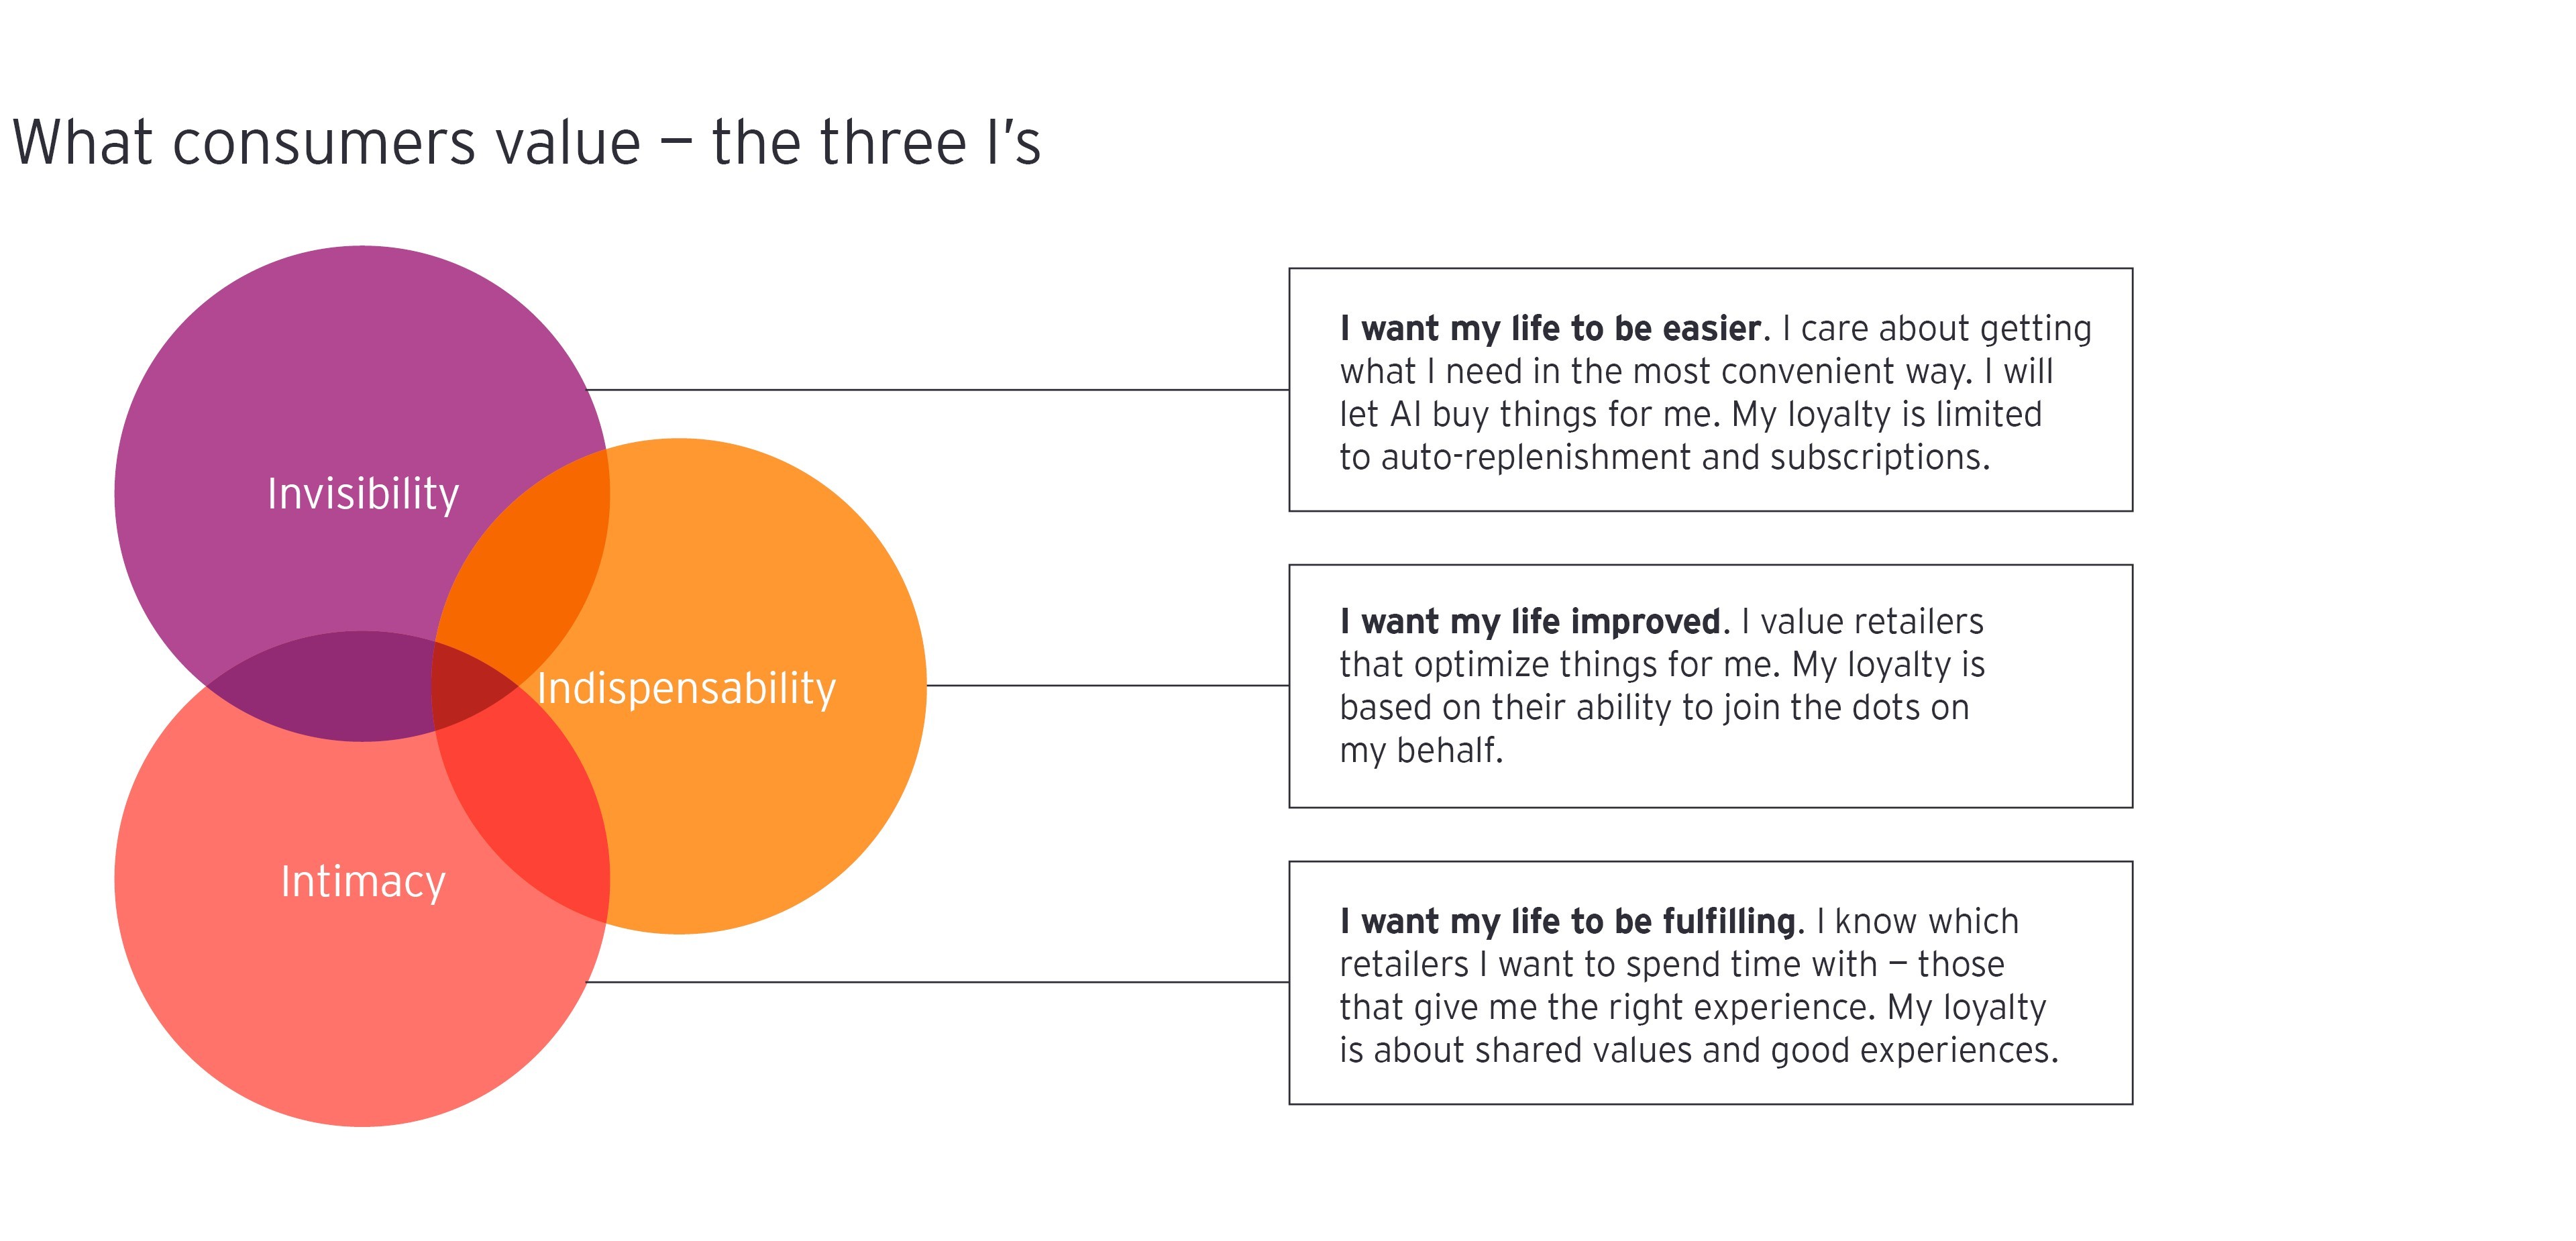 Three overlapping circles showing what consumers value: invisibility, indispensability and intimacy.